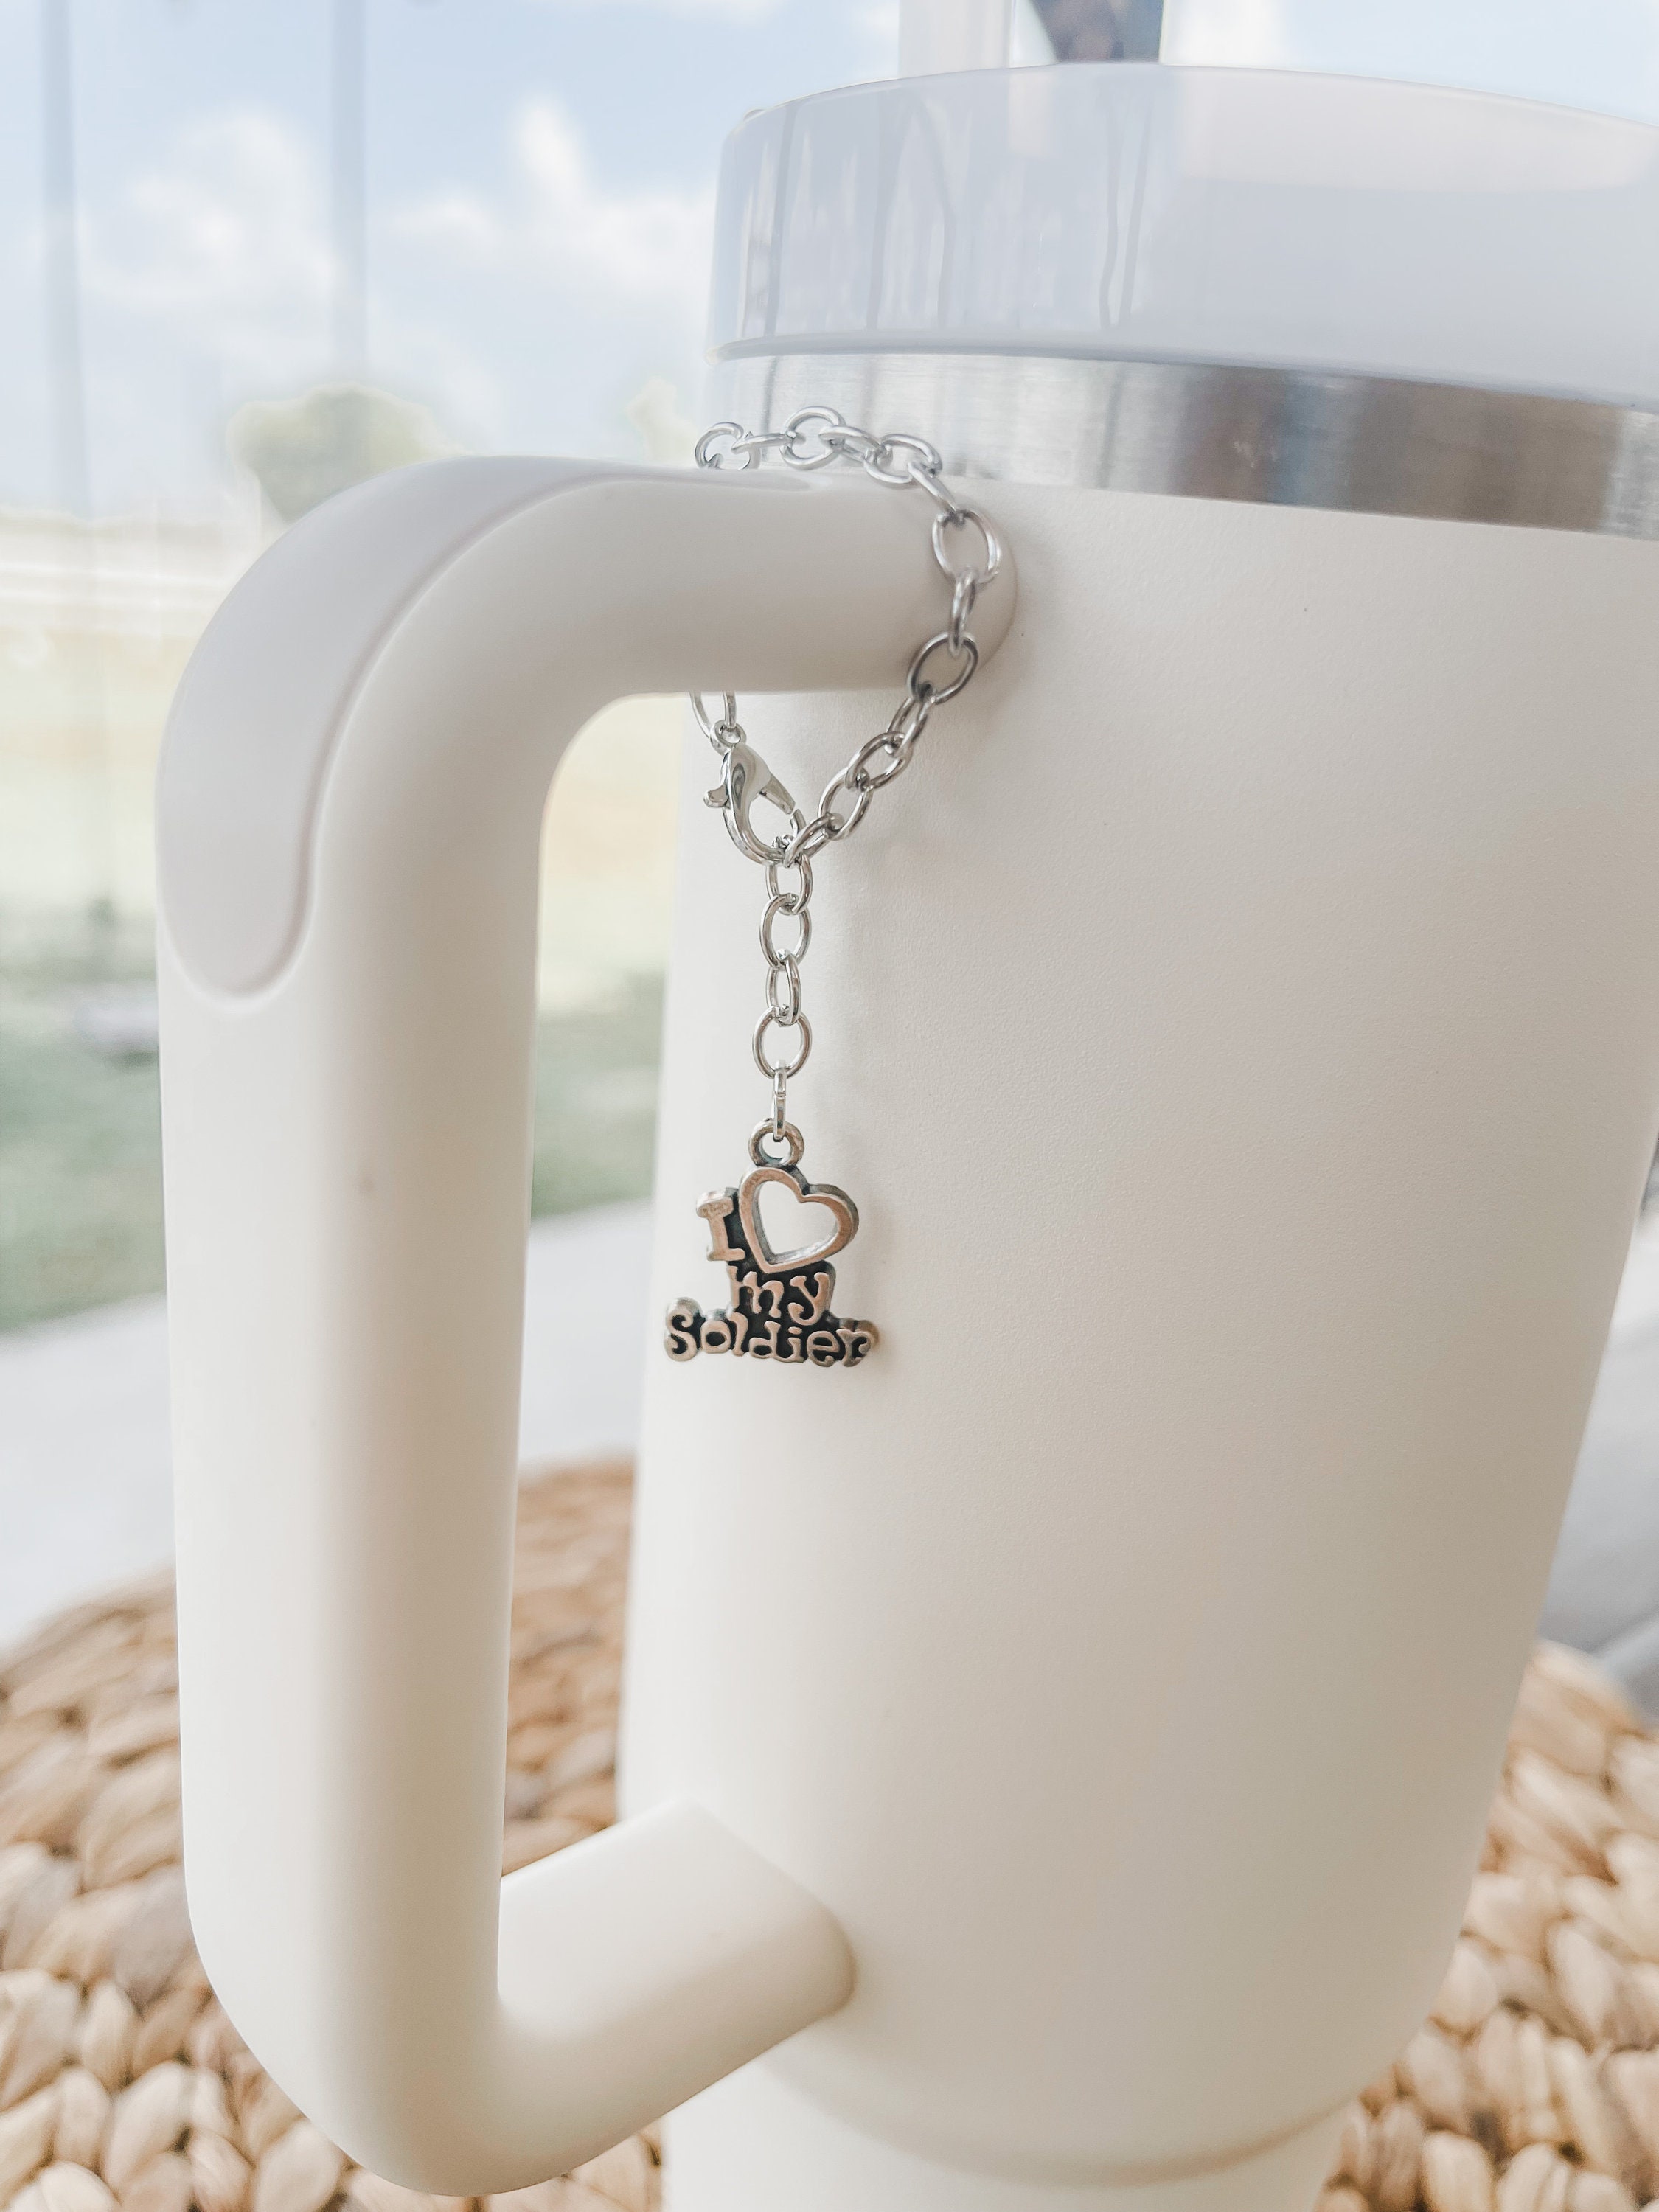 Charms for your STANLEY CUP!!! (Or any water bottle haha